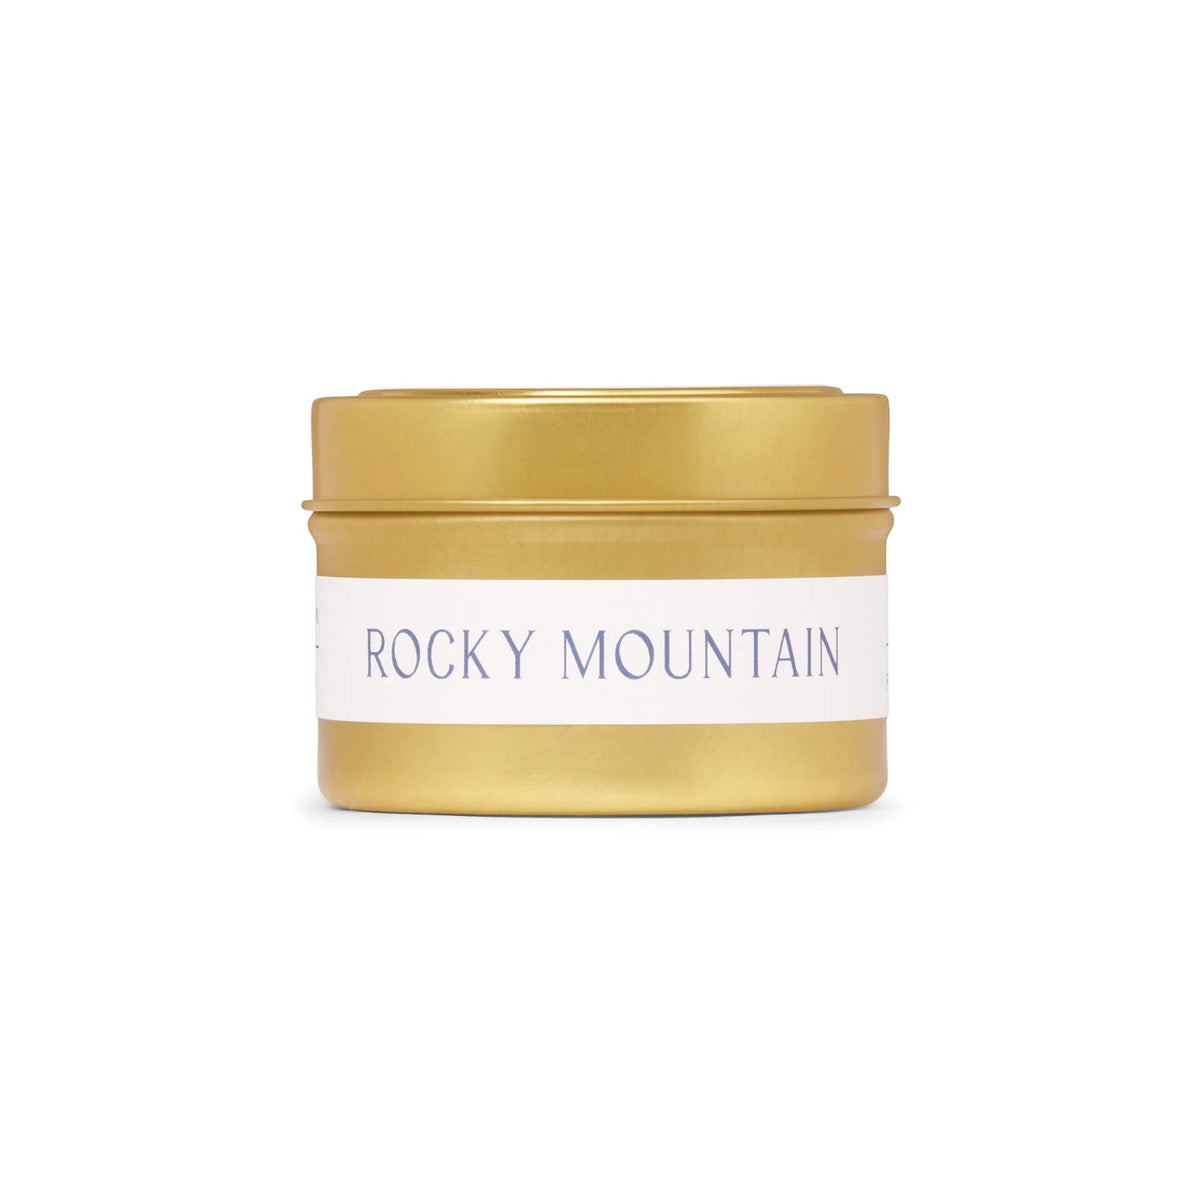 Rocky Mountain Travel Candle